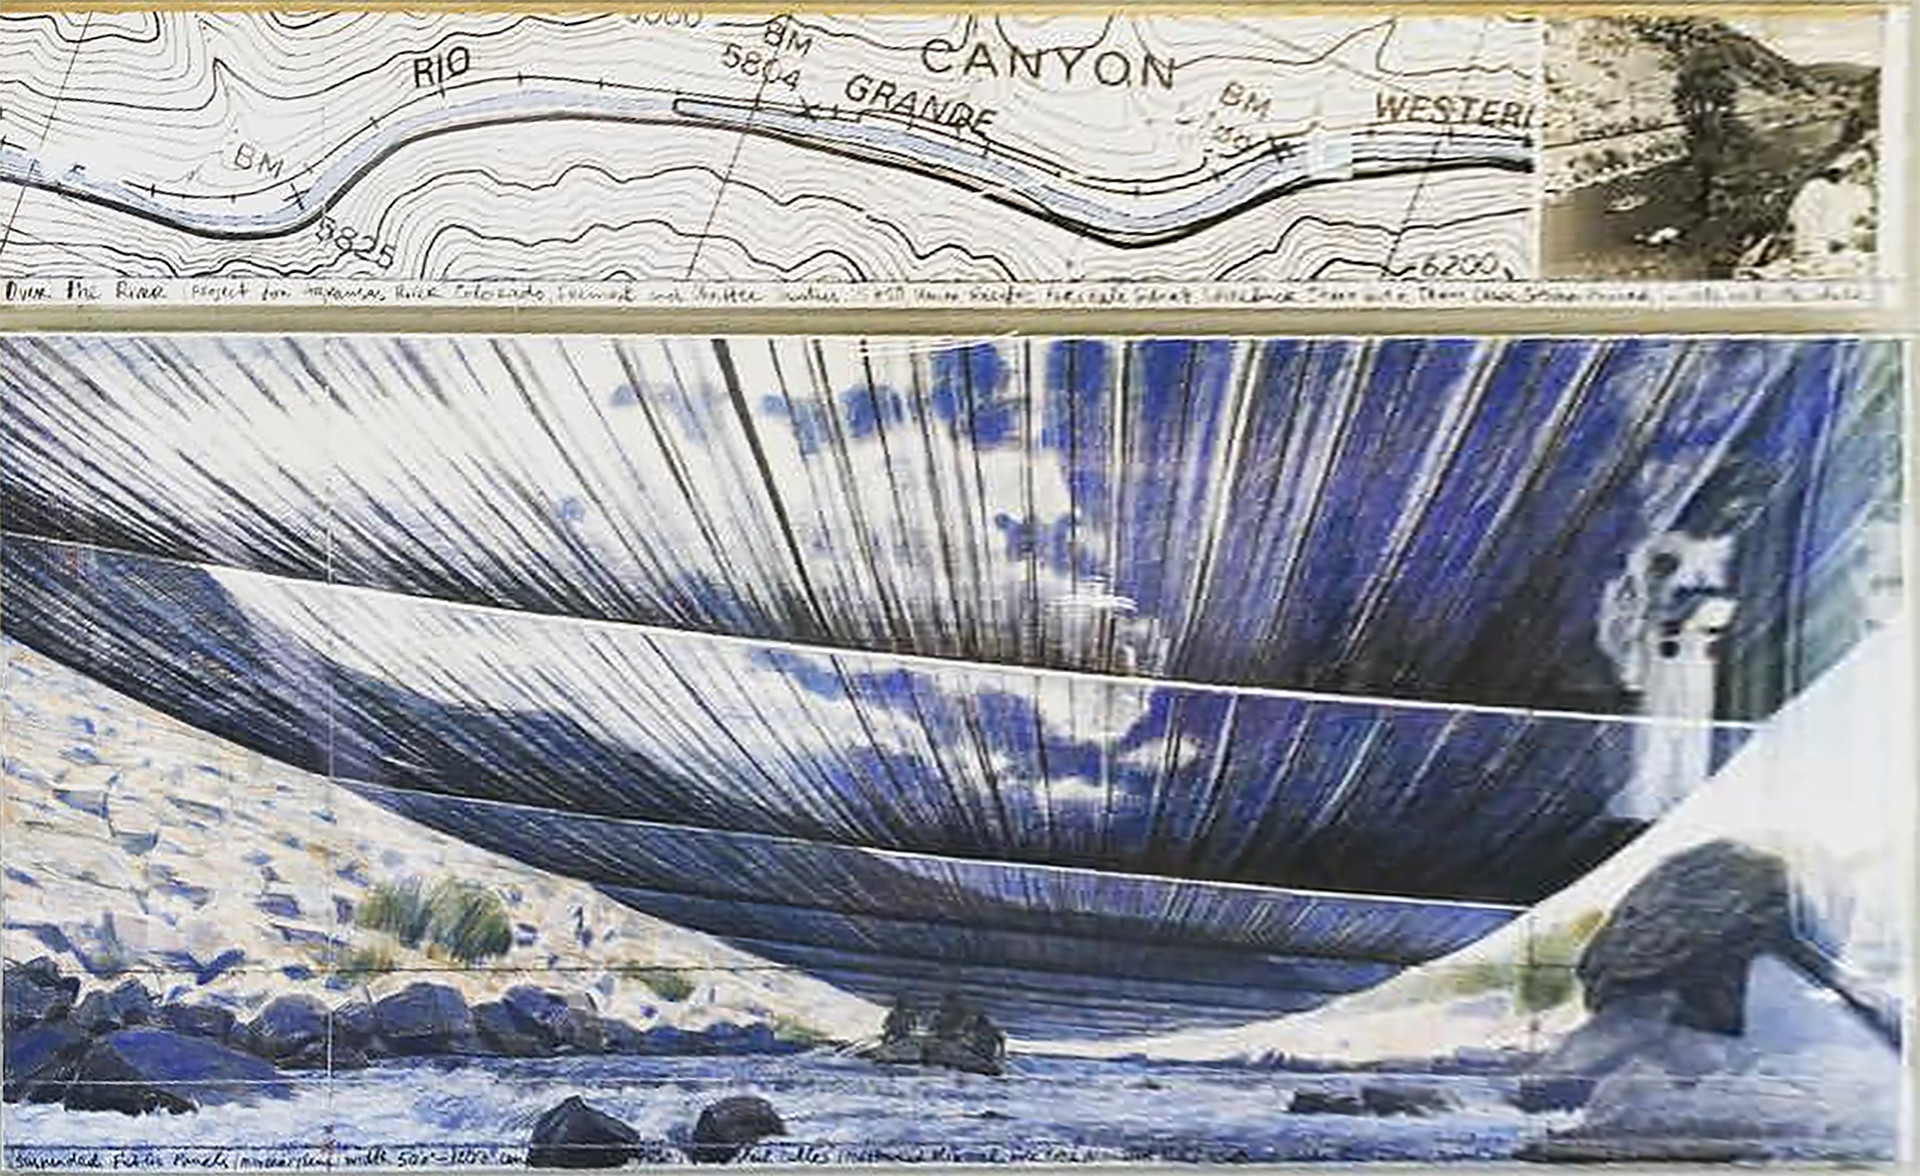 Over the River, Project for the Arkansas River, State of Colorado, 2000 Pencil, Pastel, Charcoal, Crayon Hand-drawn topographic map, photograph,  150 × 245 cm